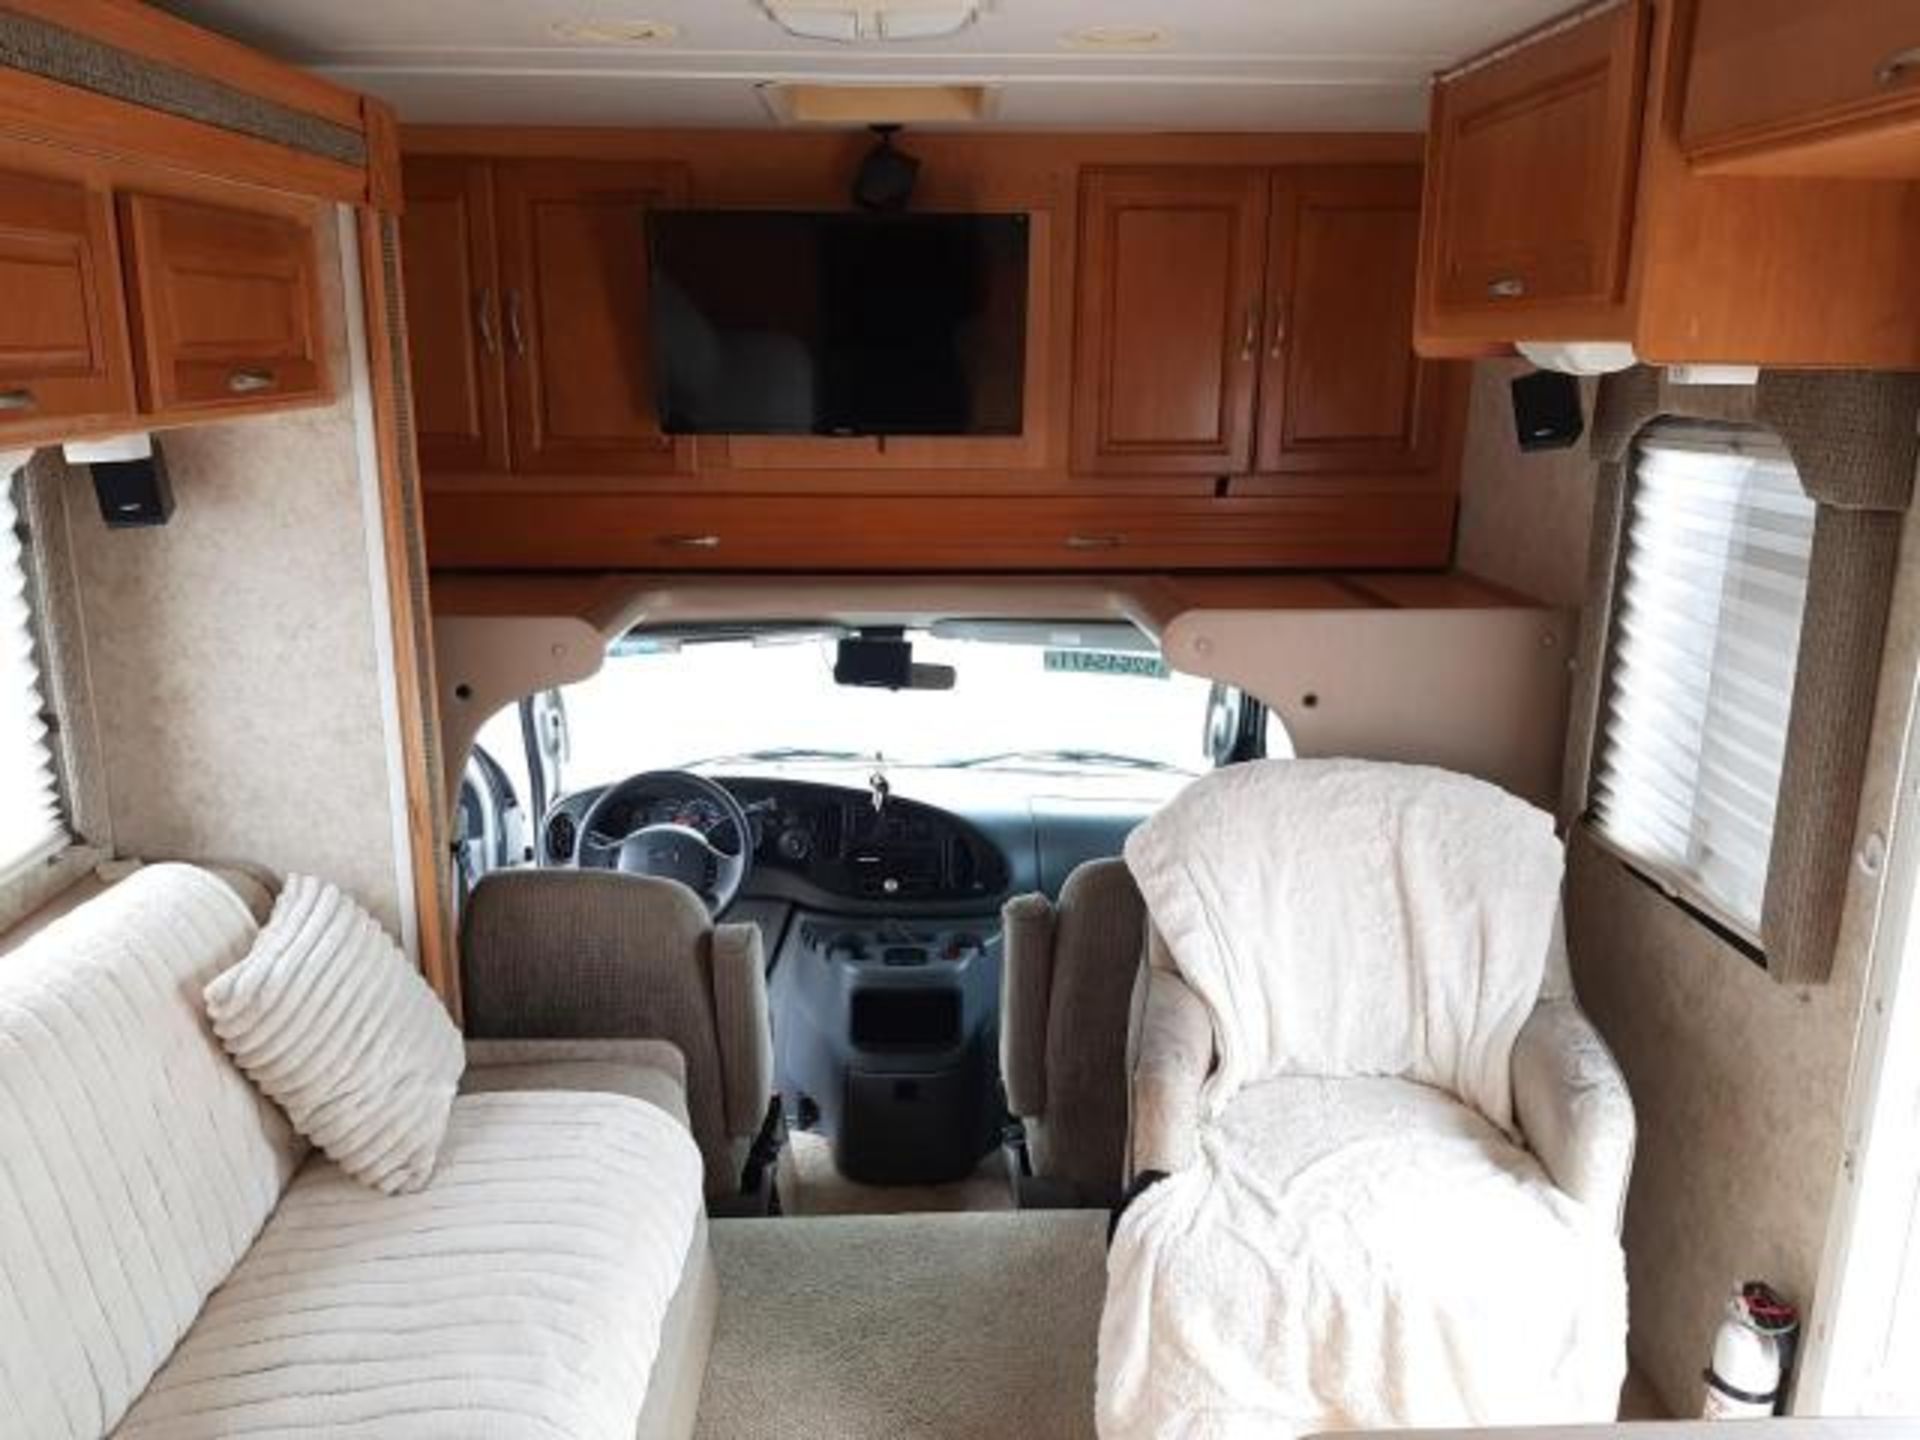 FORD E450 FOURWINDS RV 7 BERTH LHD MOTORHOME, VERY LOW MILEAGE 34,453 MILES *NO VAT* - Image 9 of 14